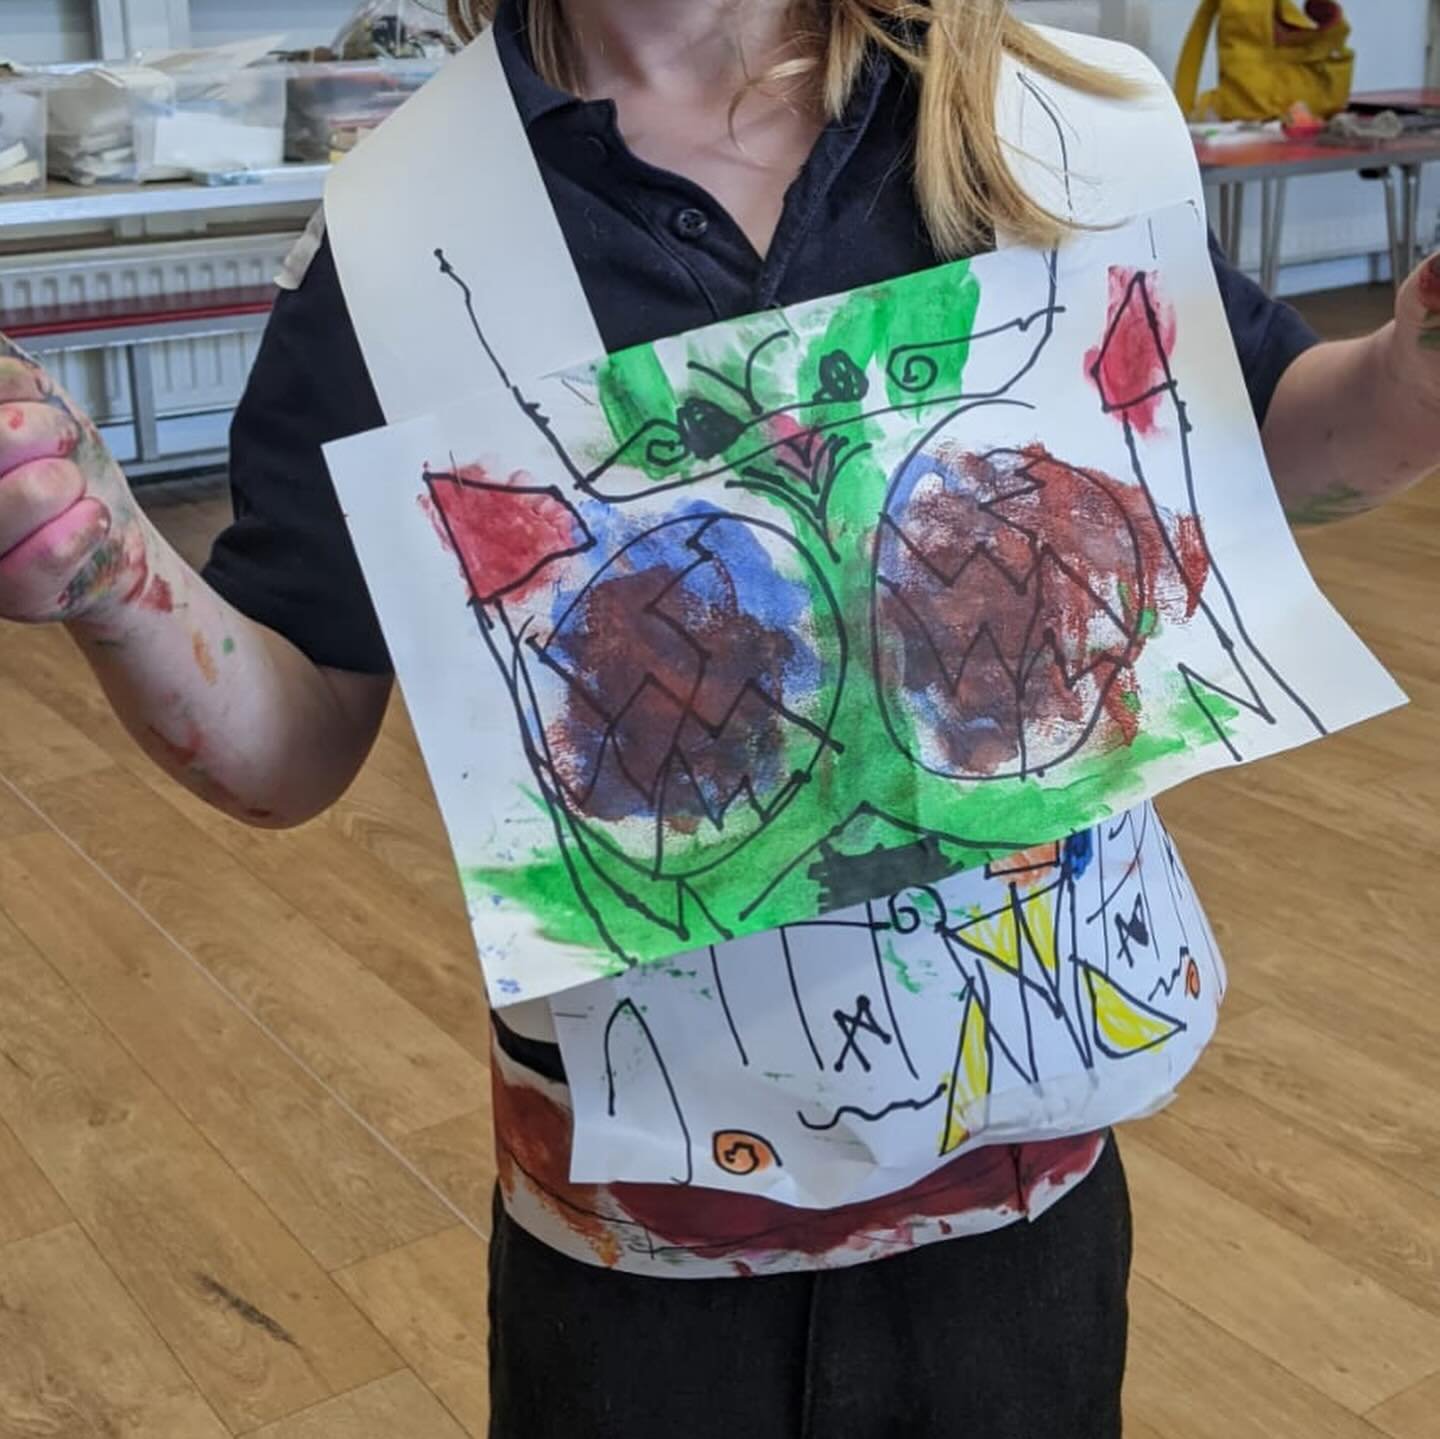 My goodness @albournecofeprimaryschool your session looks like a lot of fun! These super hero costumes are just amazing. What super creative artists you are.

Brilliant work @suzibythesee and @neenabombeena 
.
.
.
.
.
#albourneprimaryschool #albourne